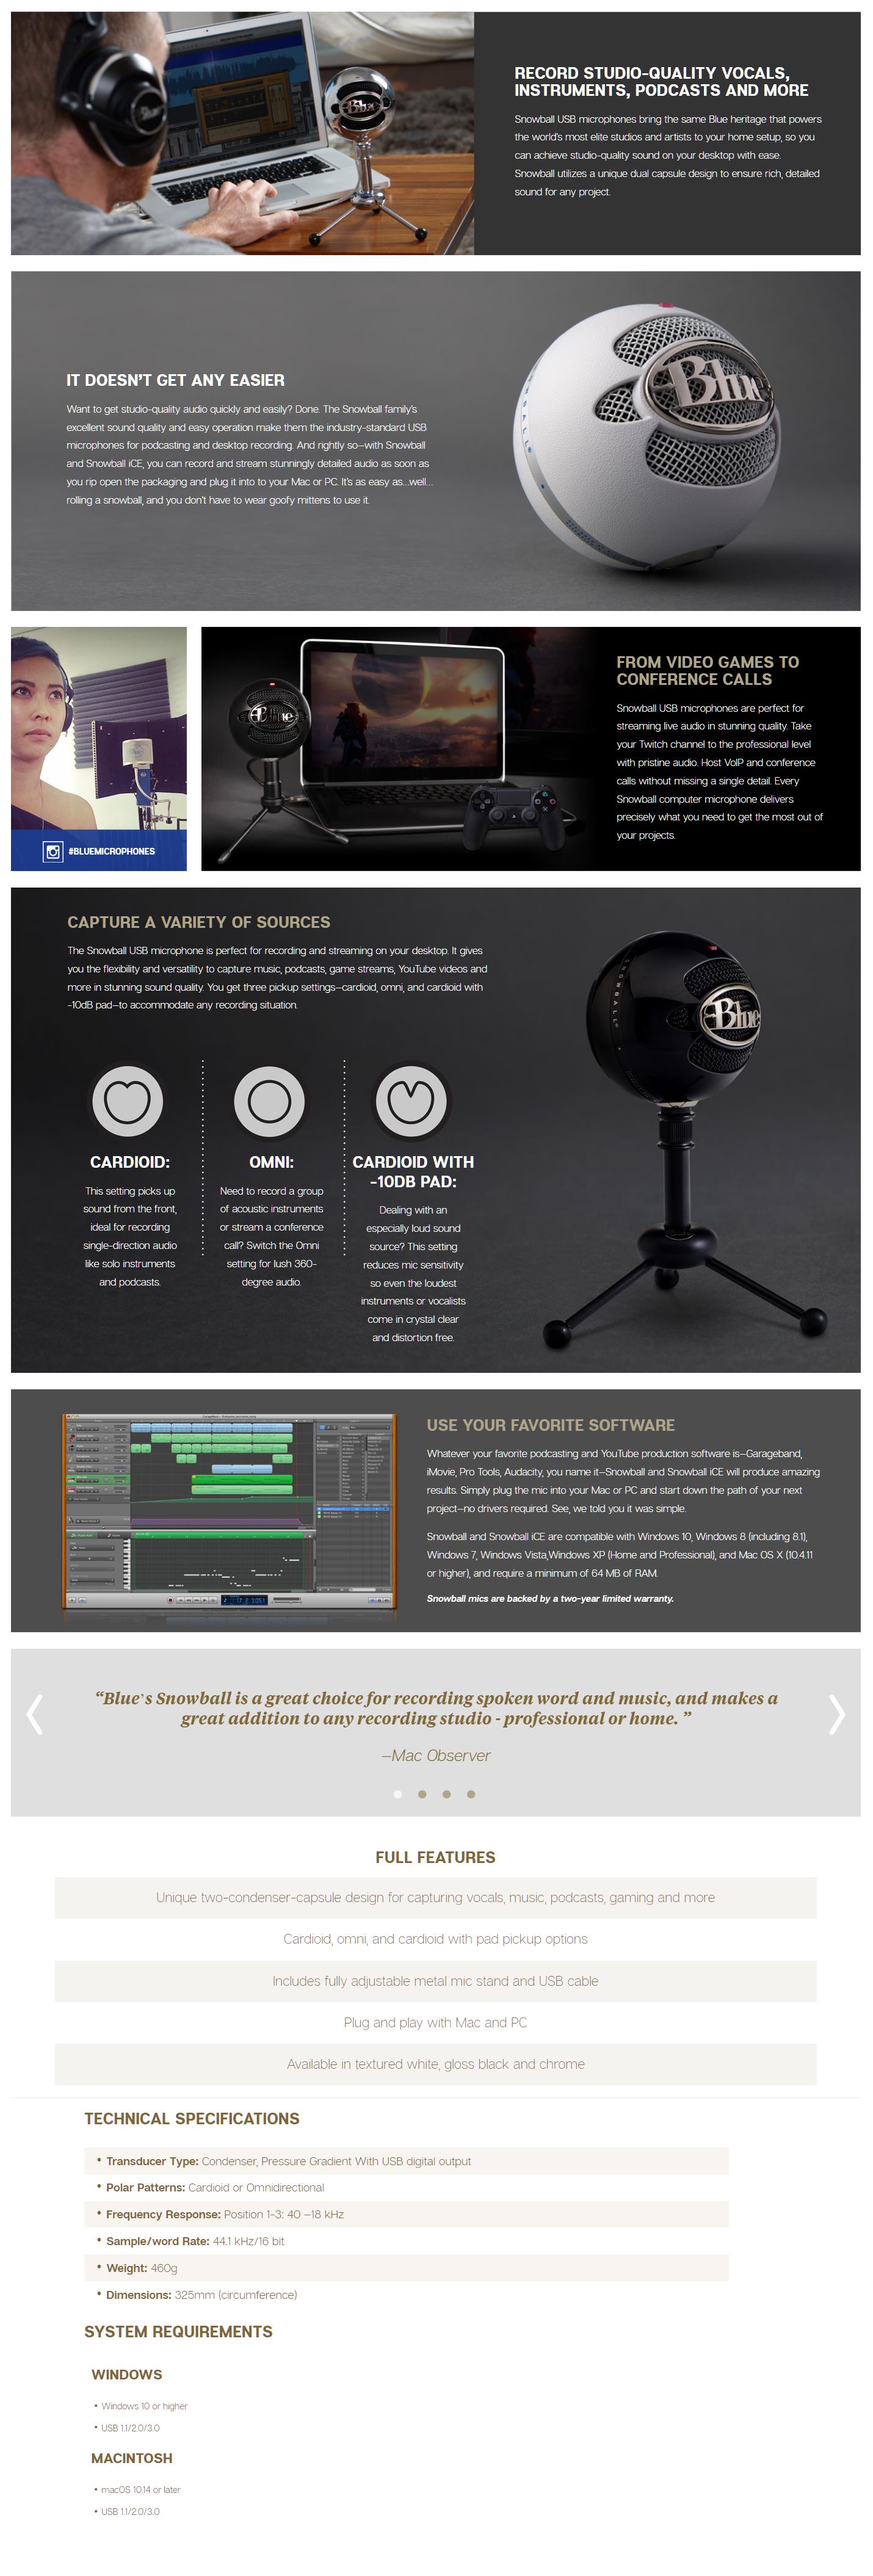 A large marketing image providing additional information about the product Blue Microphones Snowball Classic USB Microphone - White - Additional alt info not provided